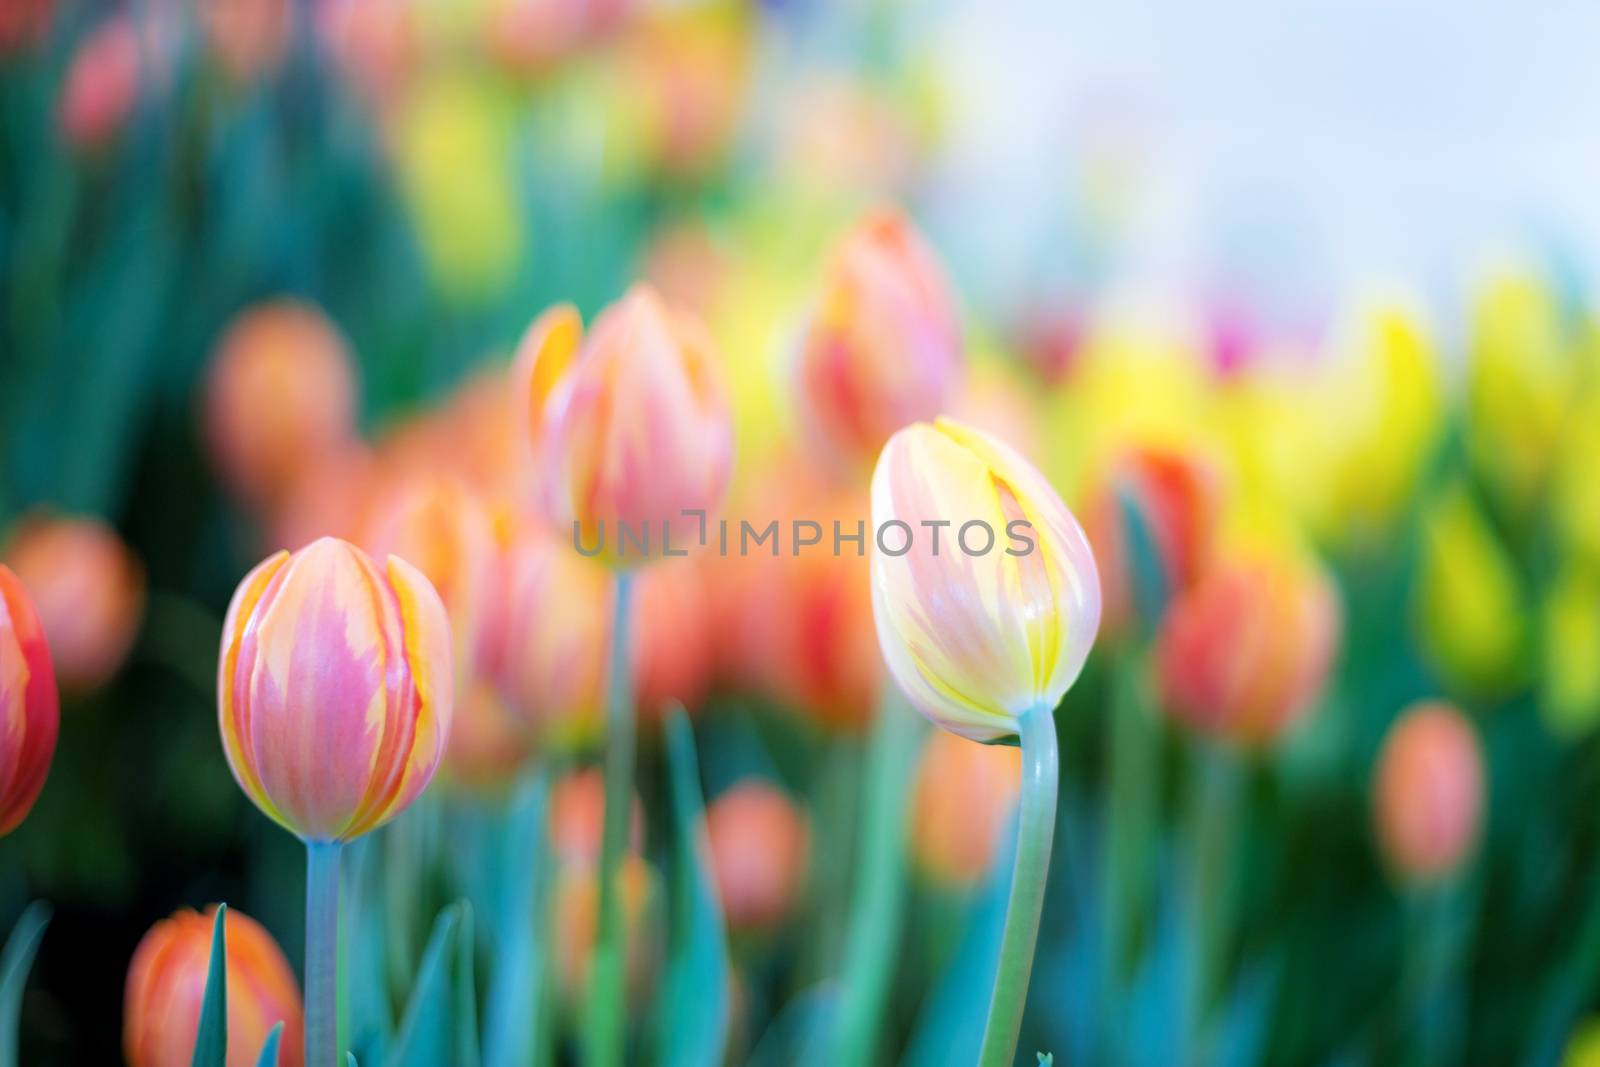 Tulip with colorful in garden at the sunlight.